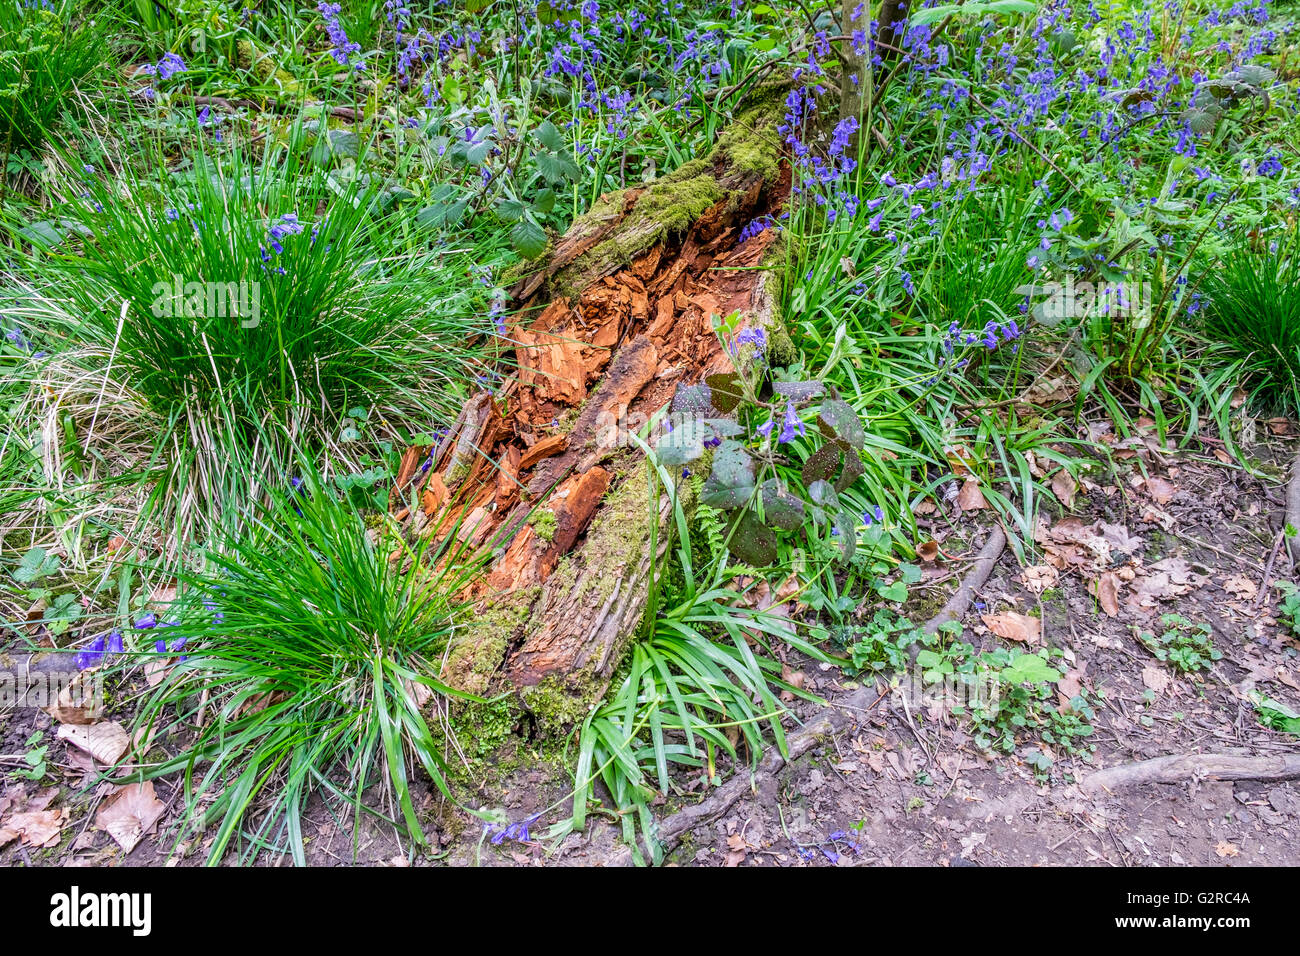 Wild Blue Bells and Wild Garlic in a growing in a field with a decaying tree. Stock Photo